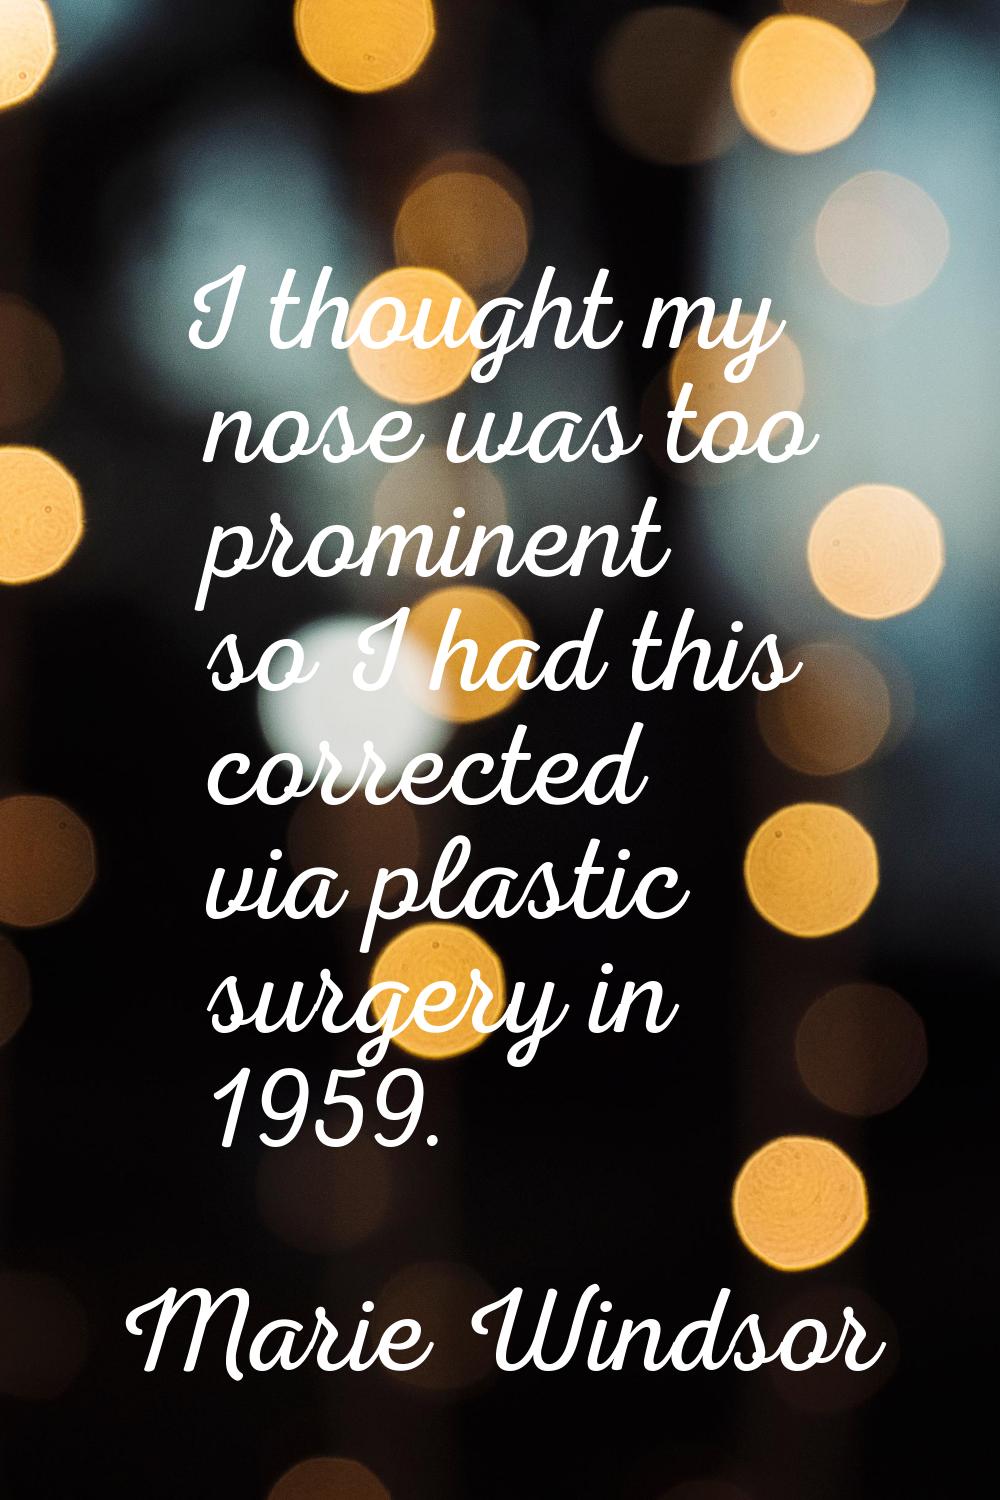 I thought my nose was too prominent so I had this corrected via plastic surgery in 1959.